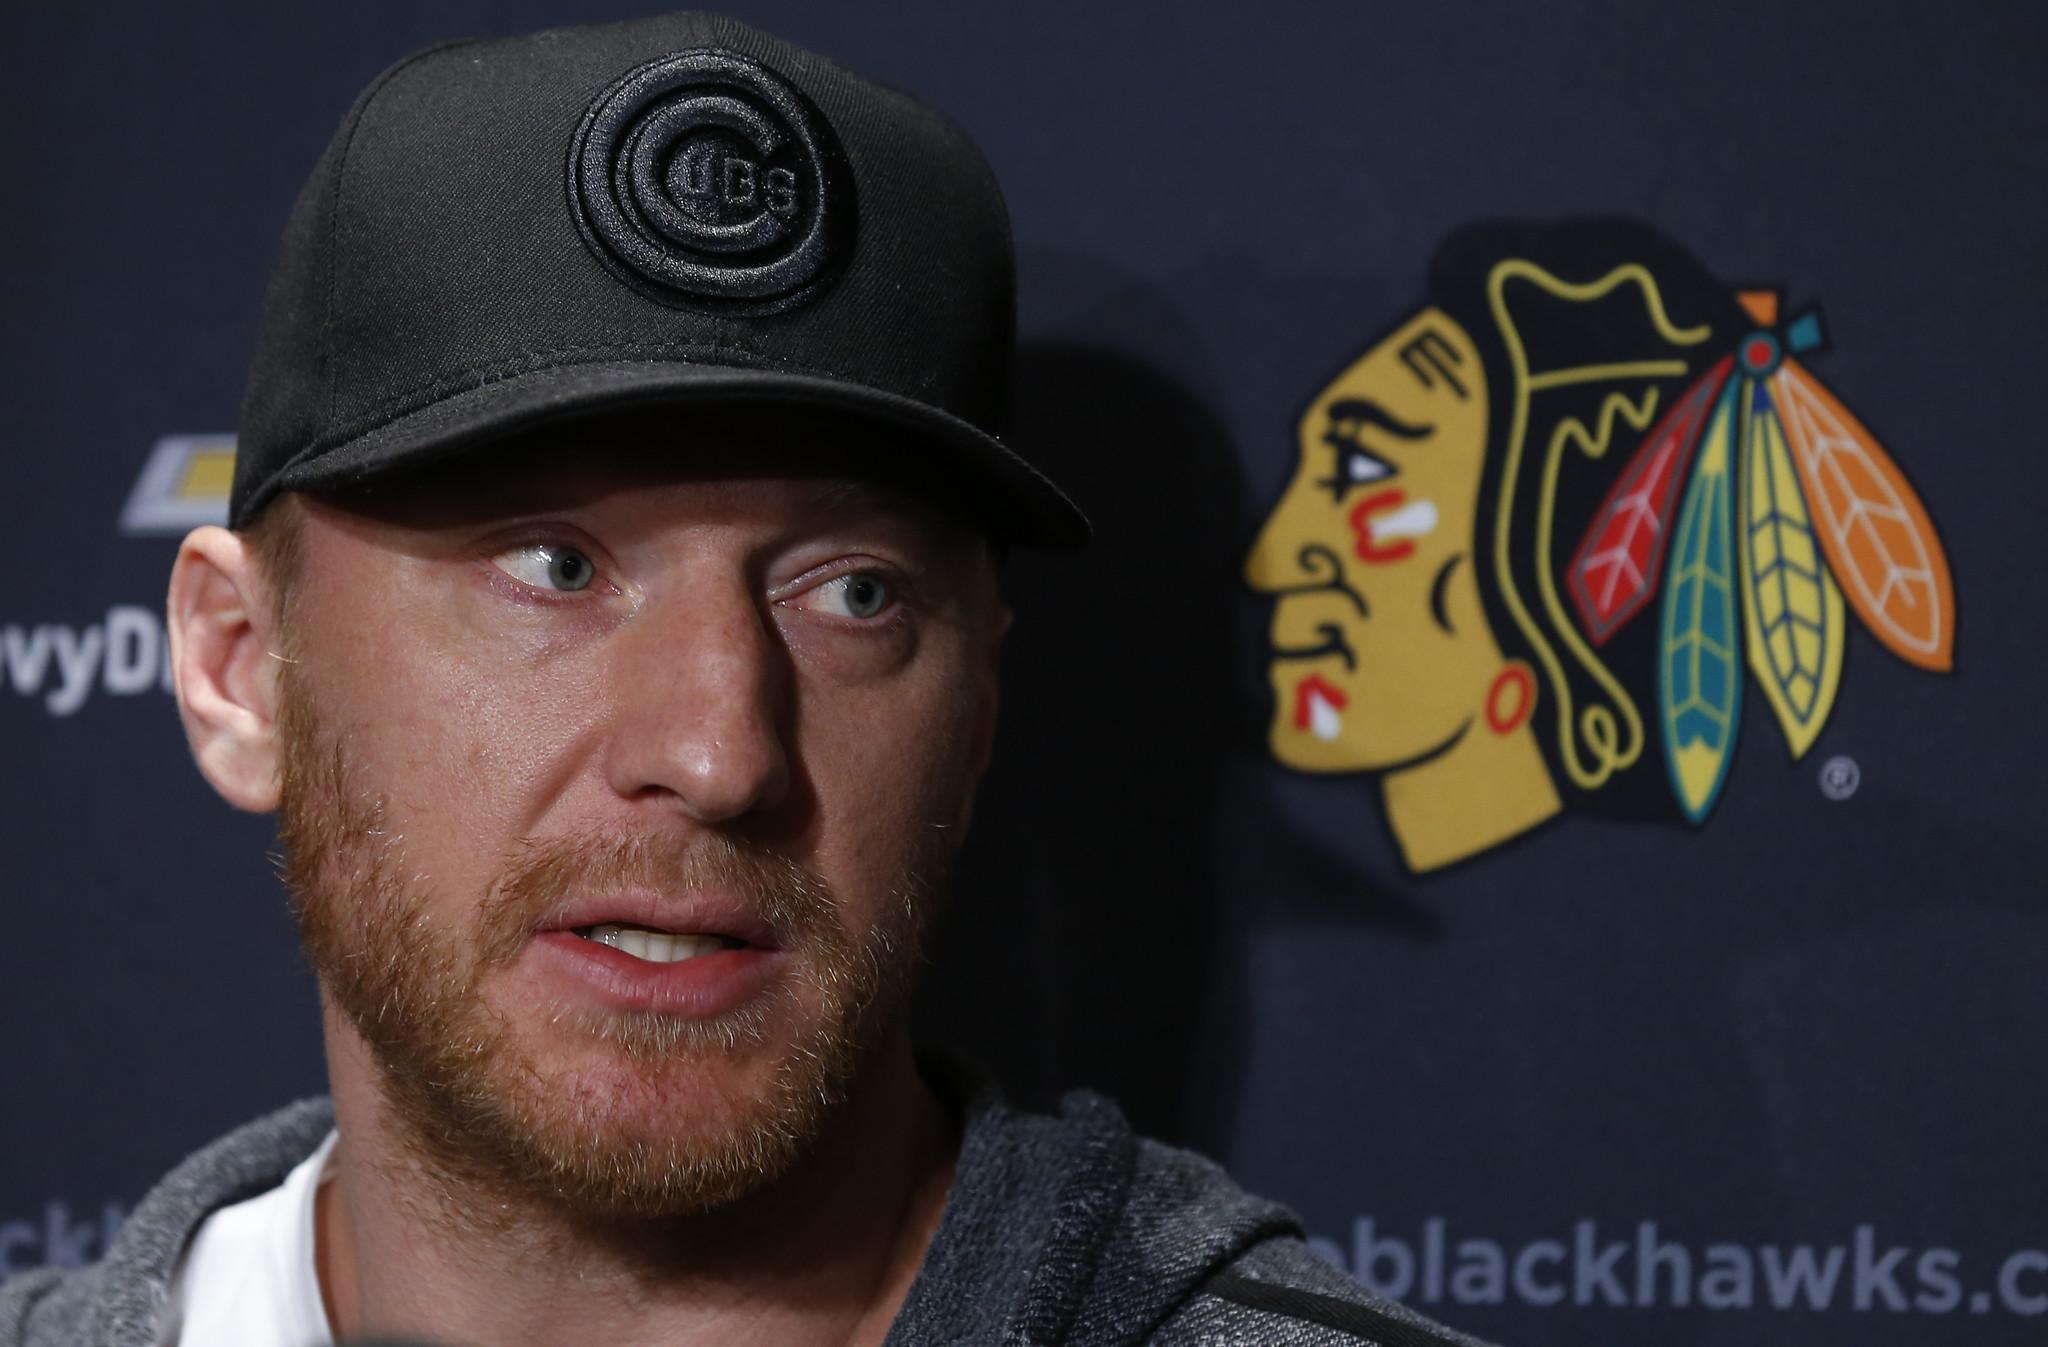 Blackhawks Will Honor Marian Hossa's Hall of Fame Induction on